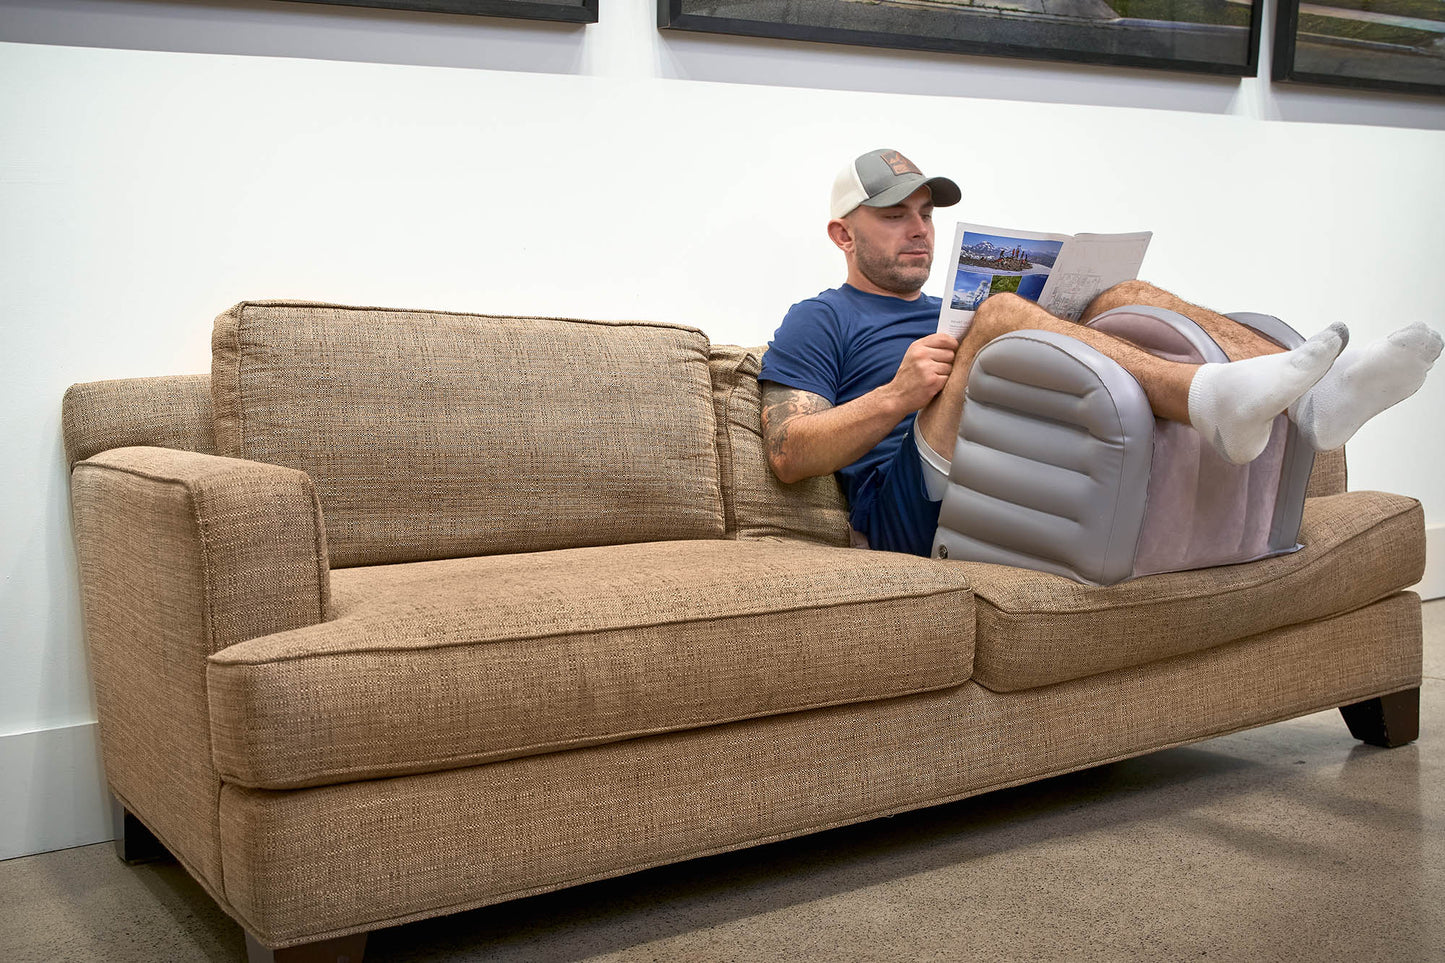 Fortis LBRT Couch Pillow